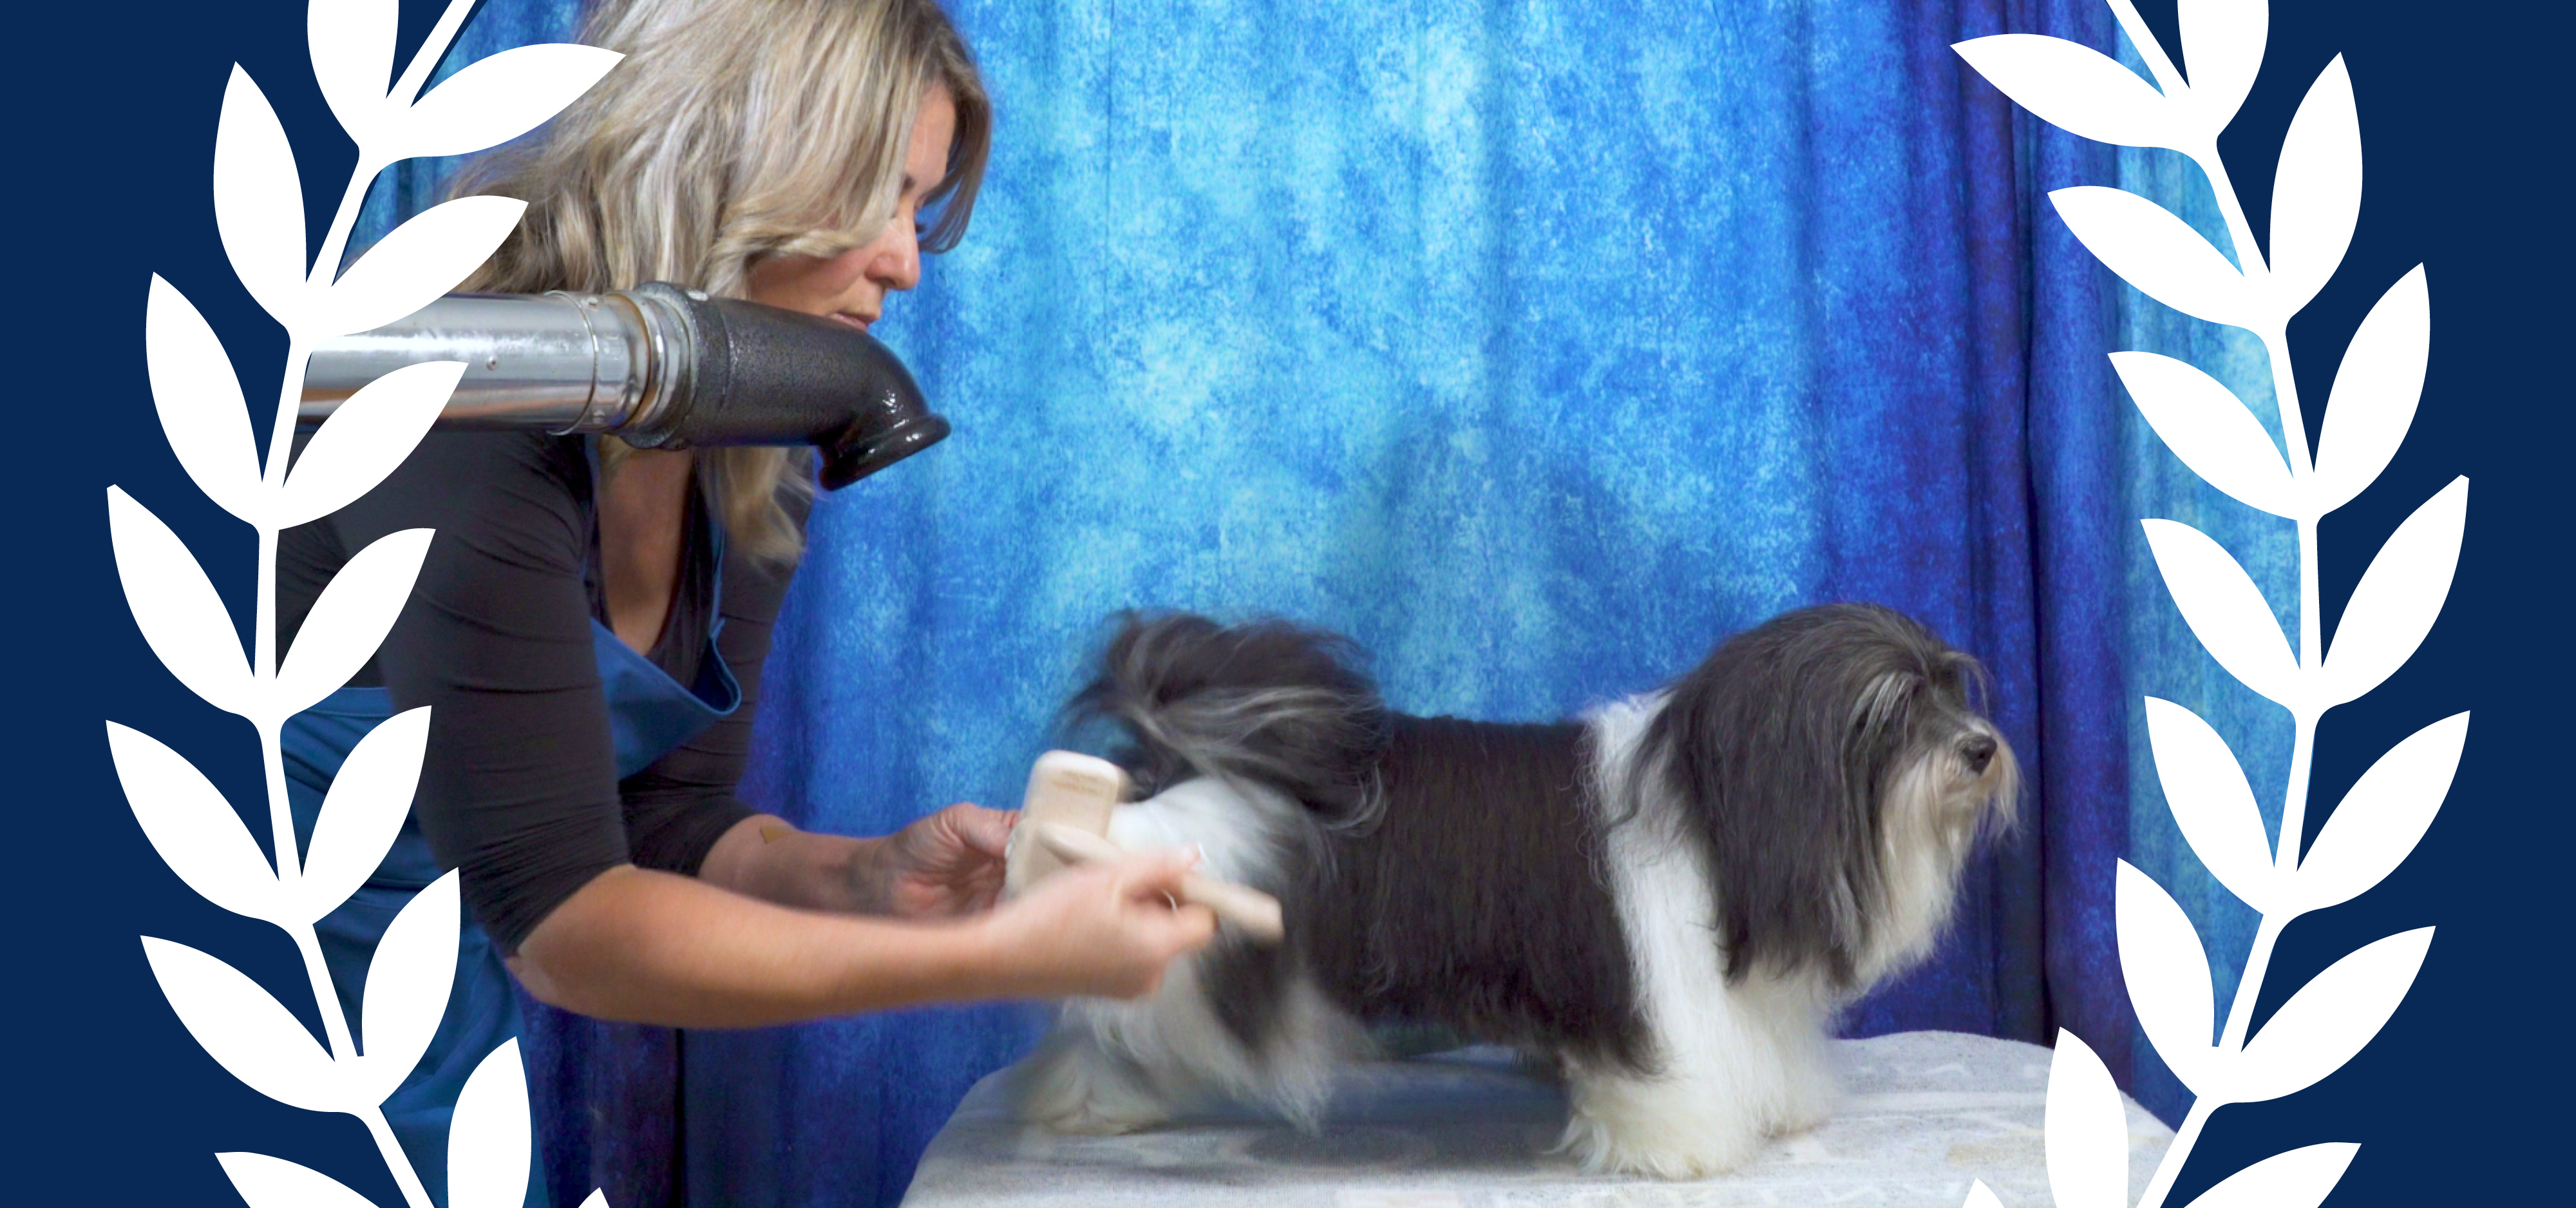 Allison Alexander drying and brushing a Havanese dog.